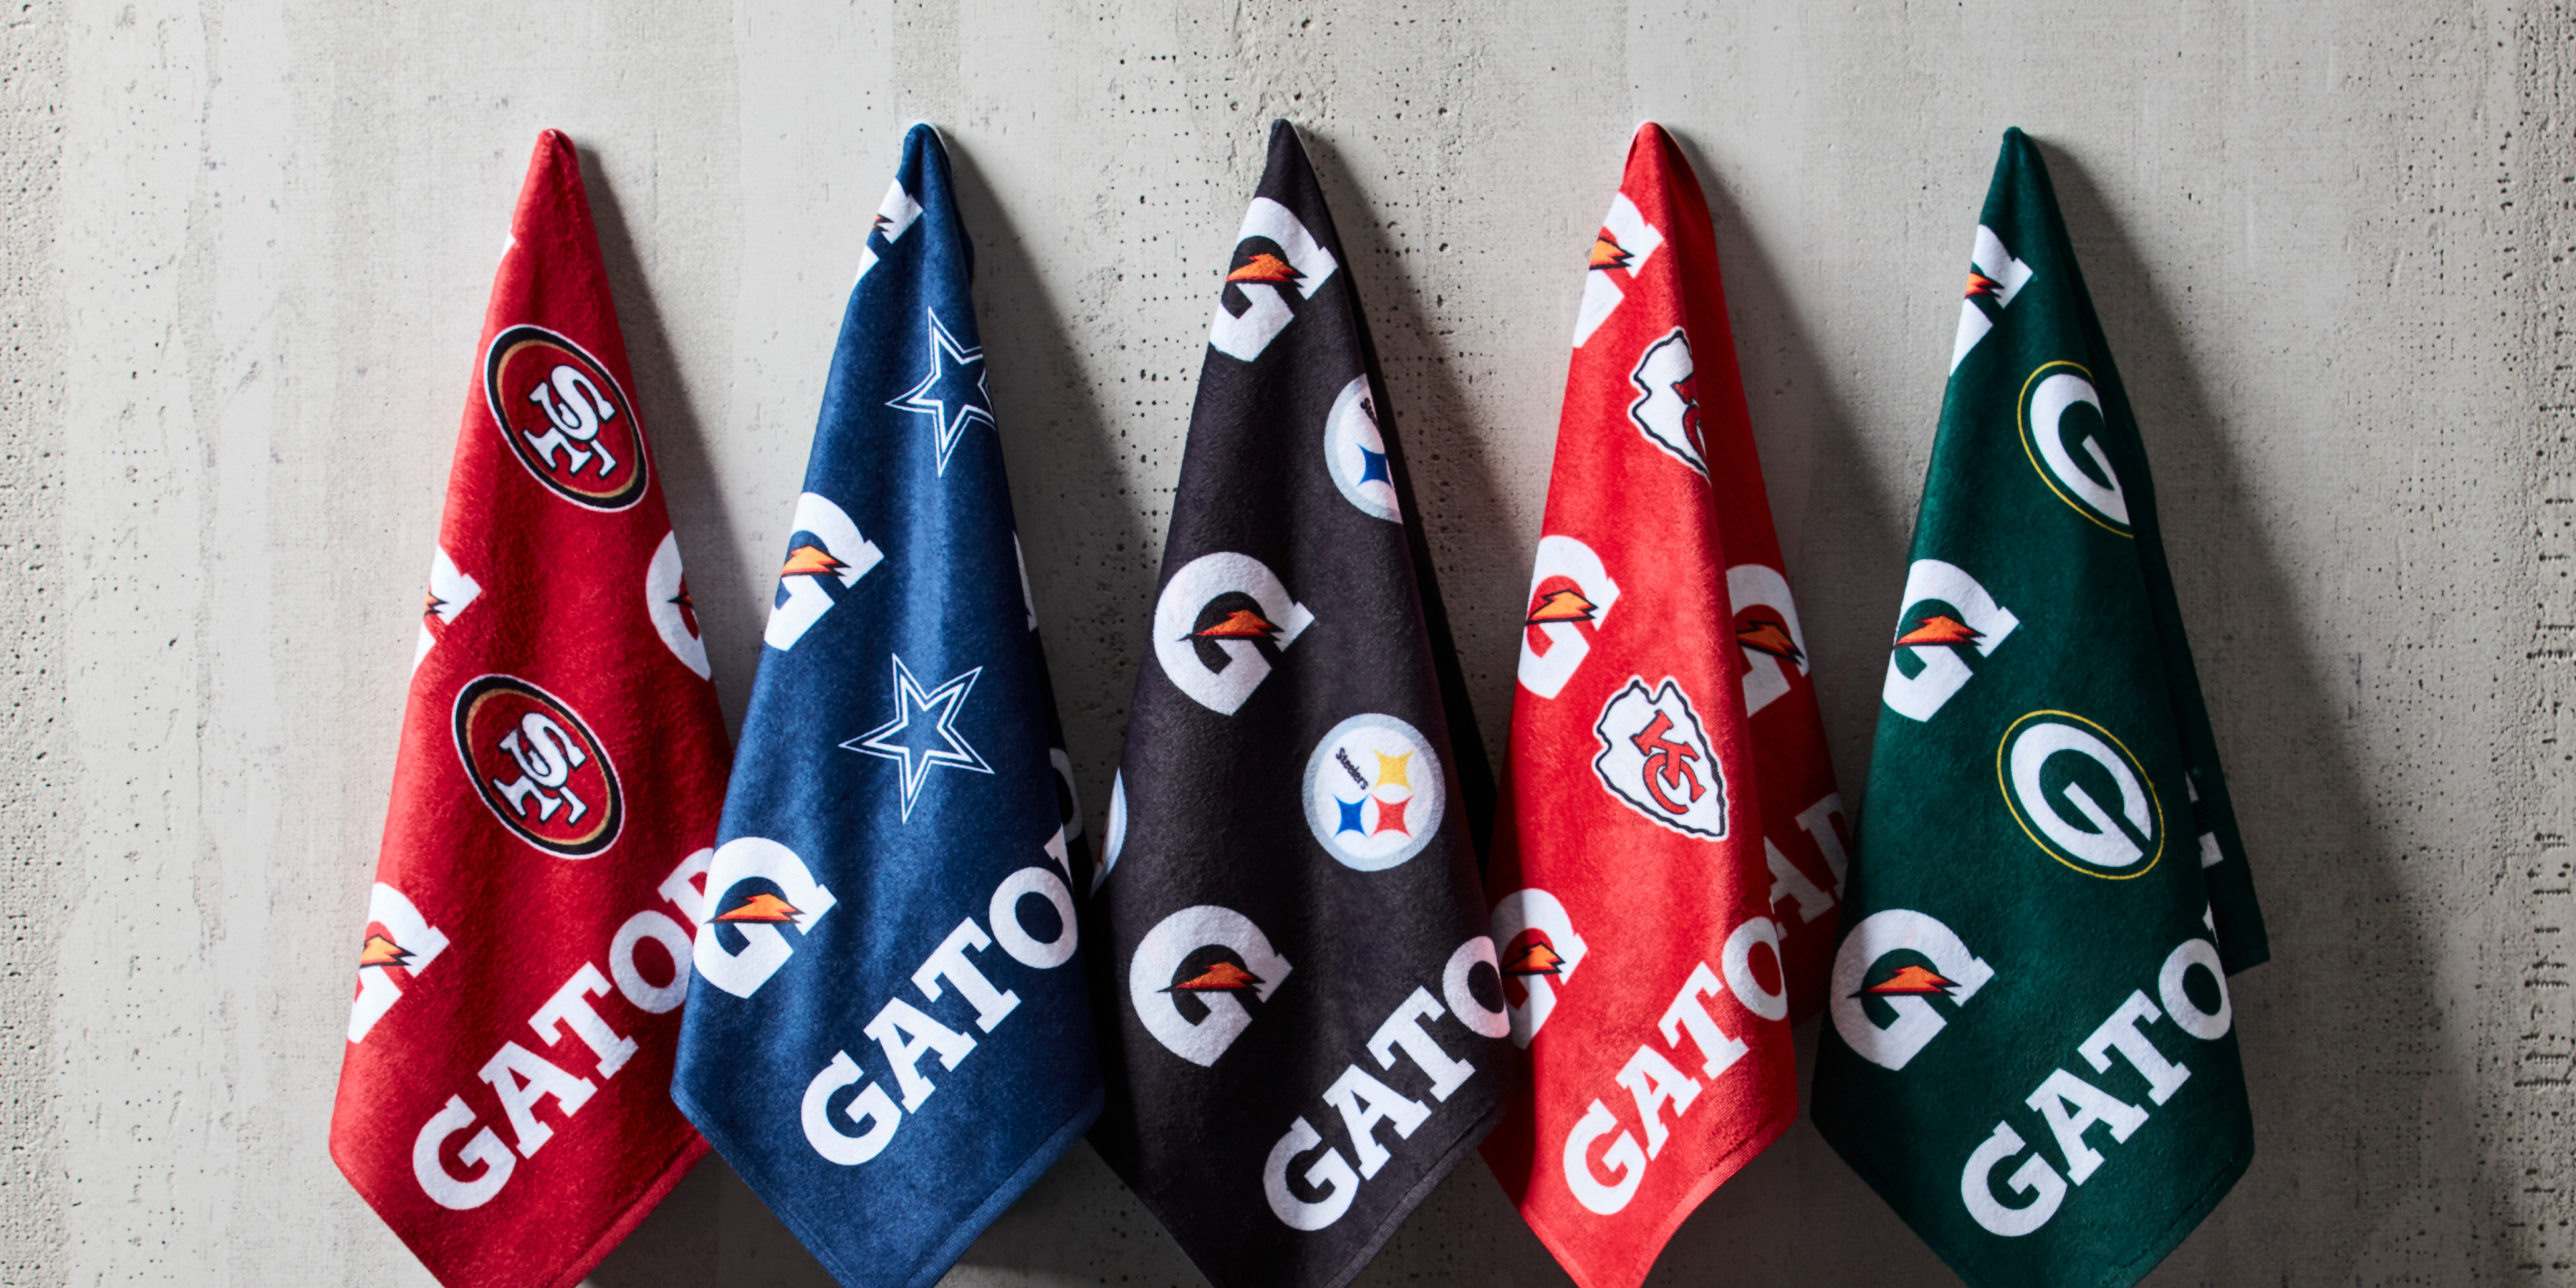 NFL Pro Towels hanging on a wall